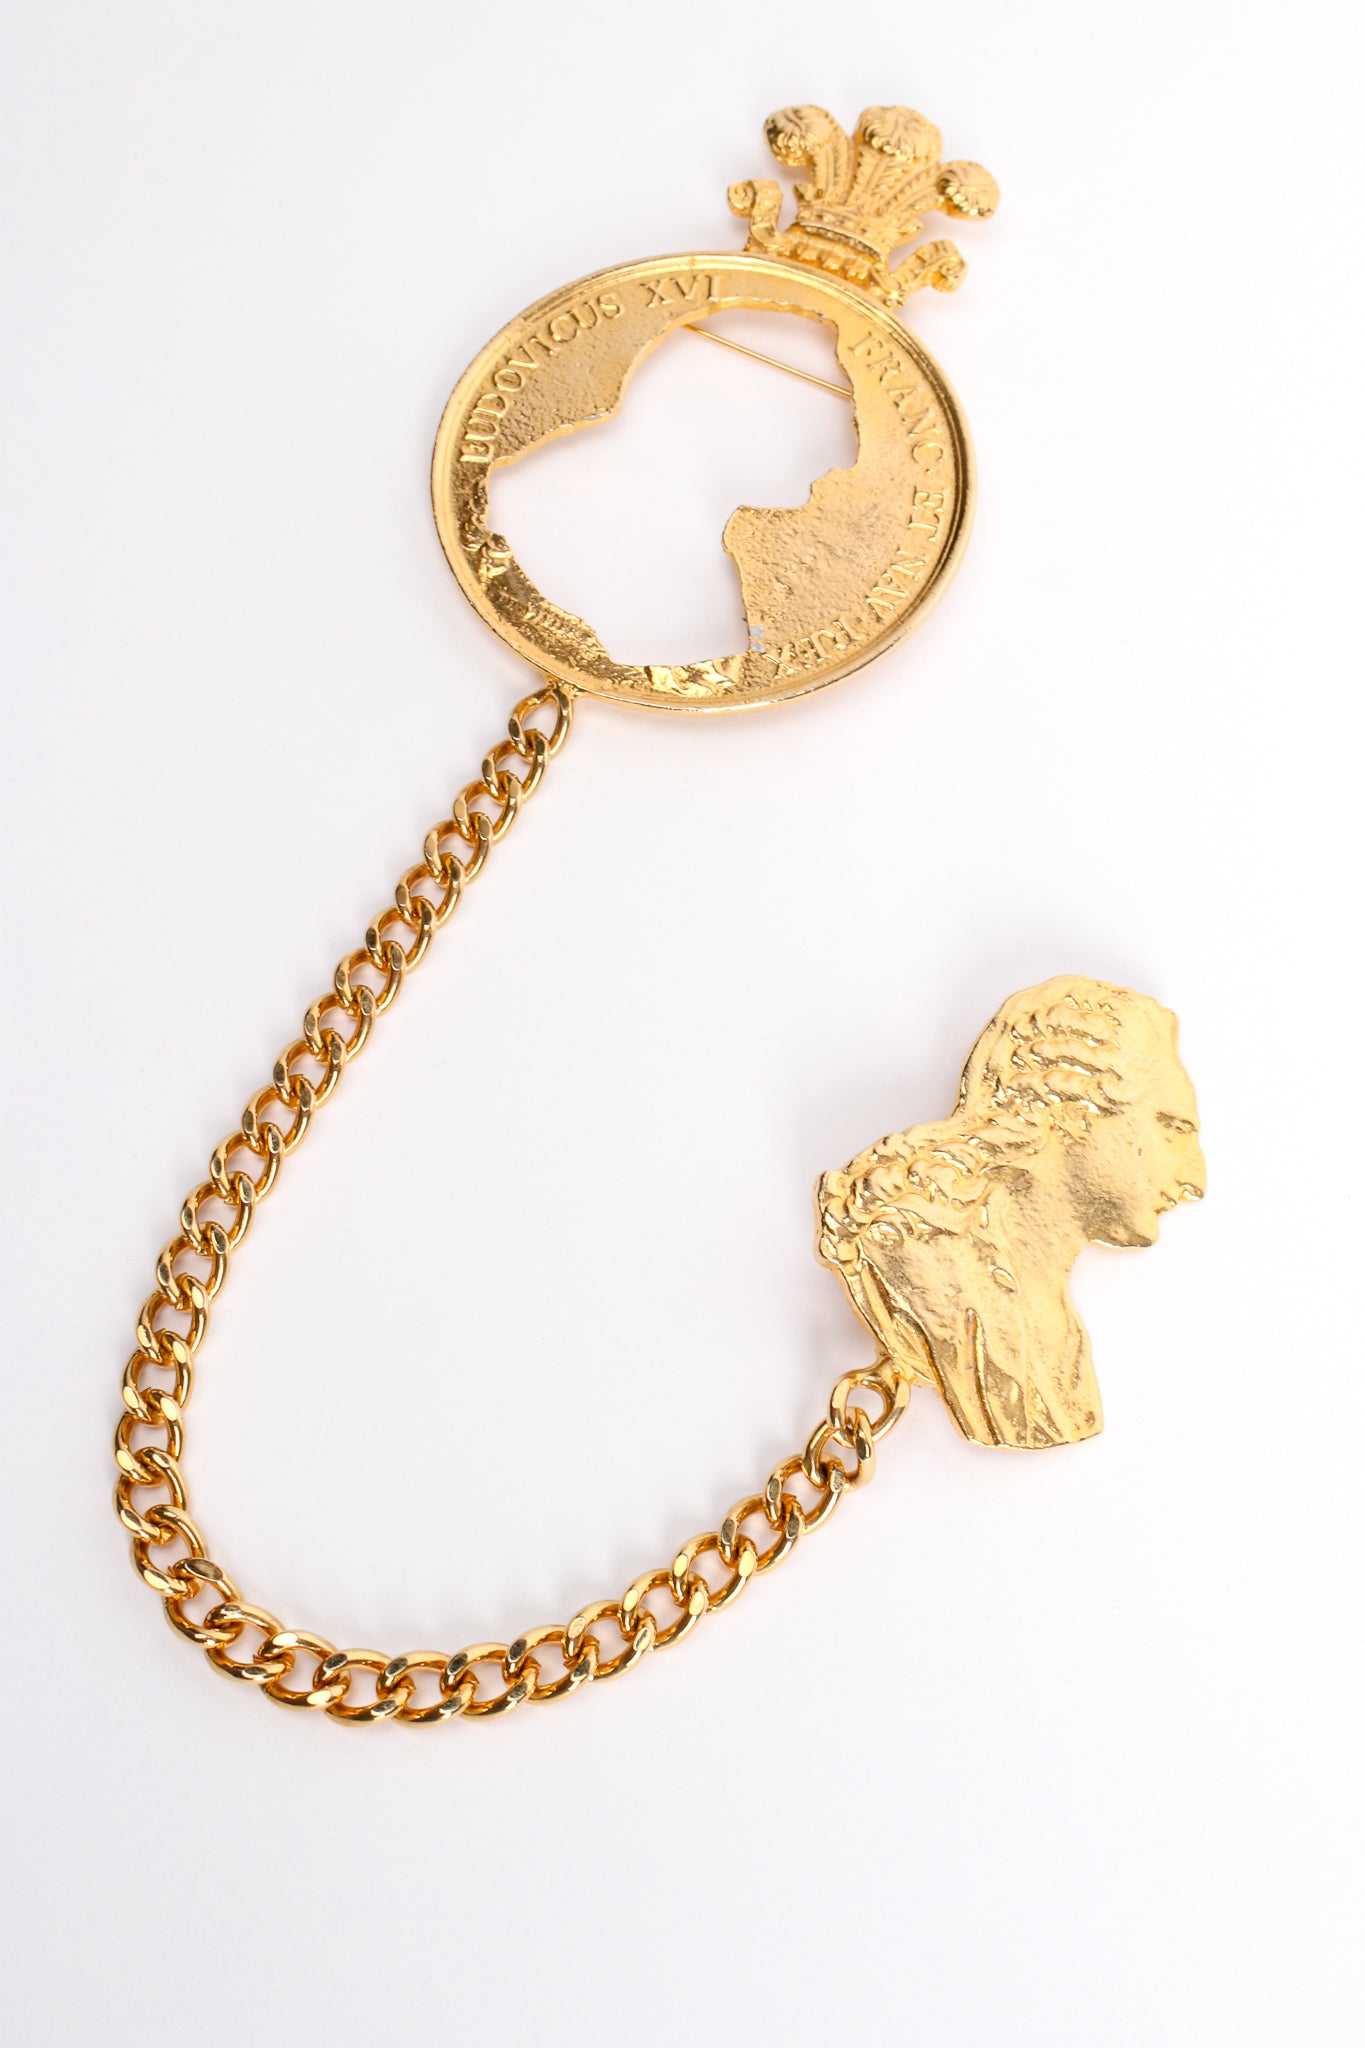 Vintage Marla Buck Silhouette Coin Cutout Chain Brooch at Recess Los Angeles